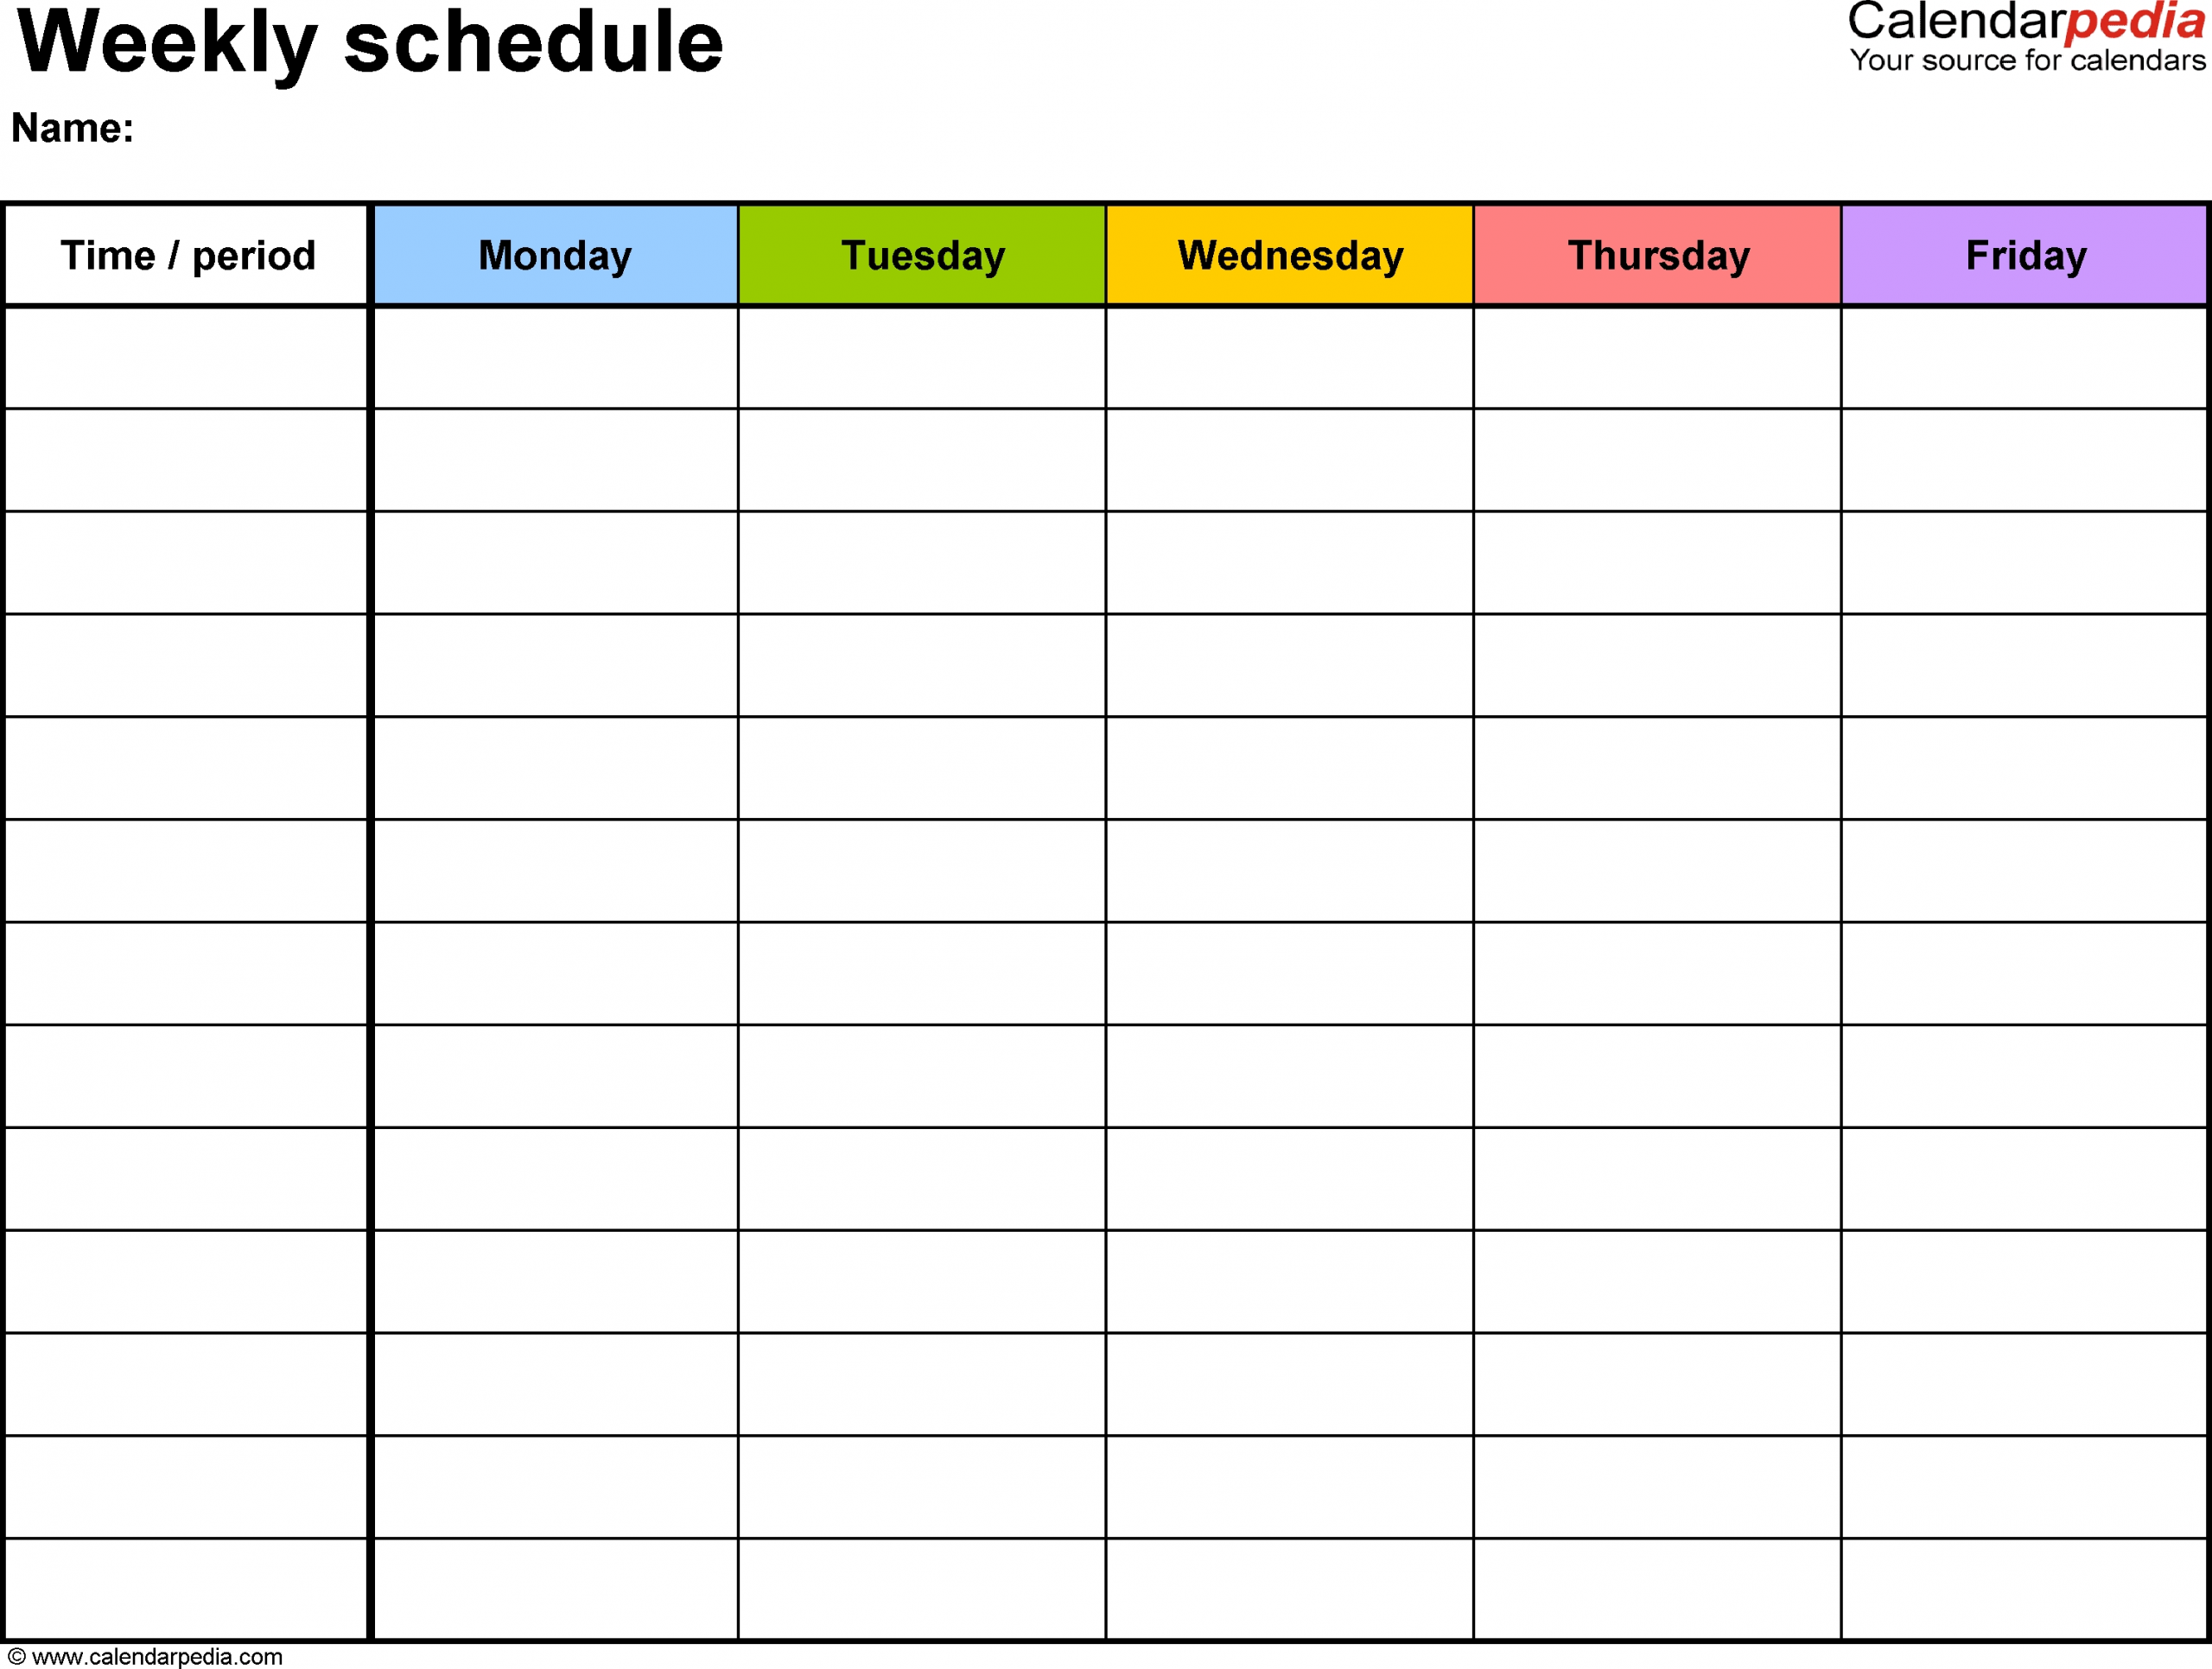 Free Weekly Schedule Templates For Word - 18 Templates inside Printable Calendar Weekly Planner Free